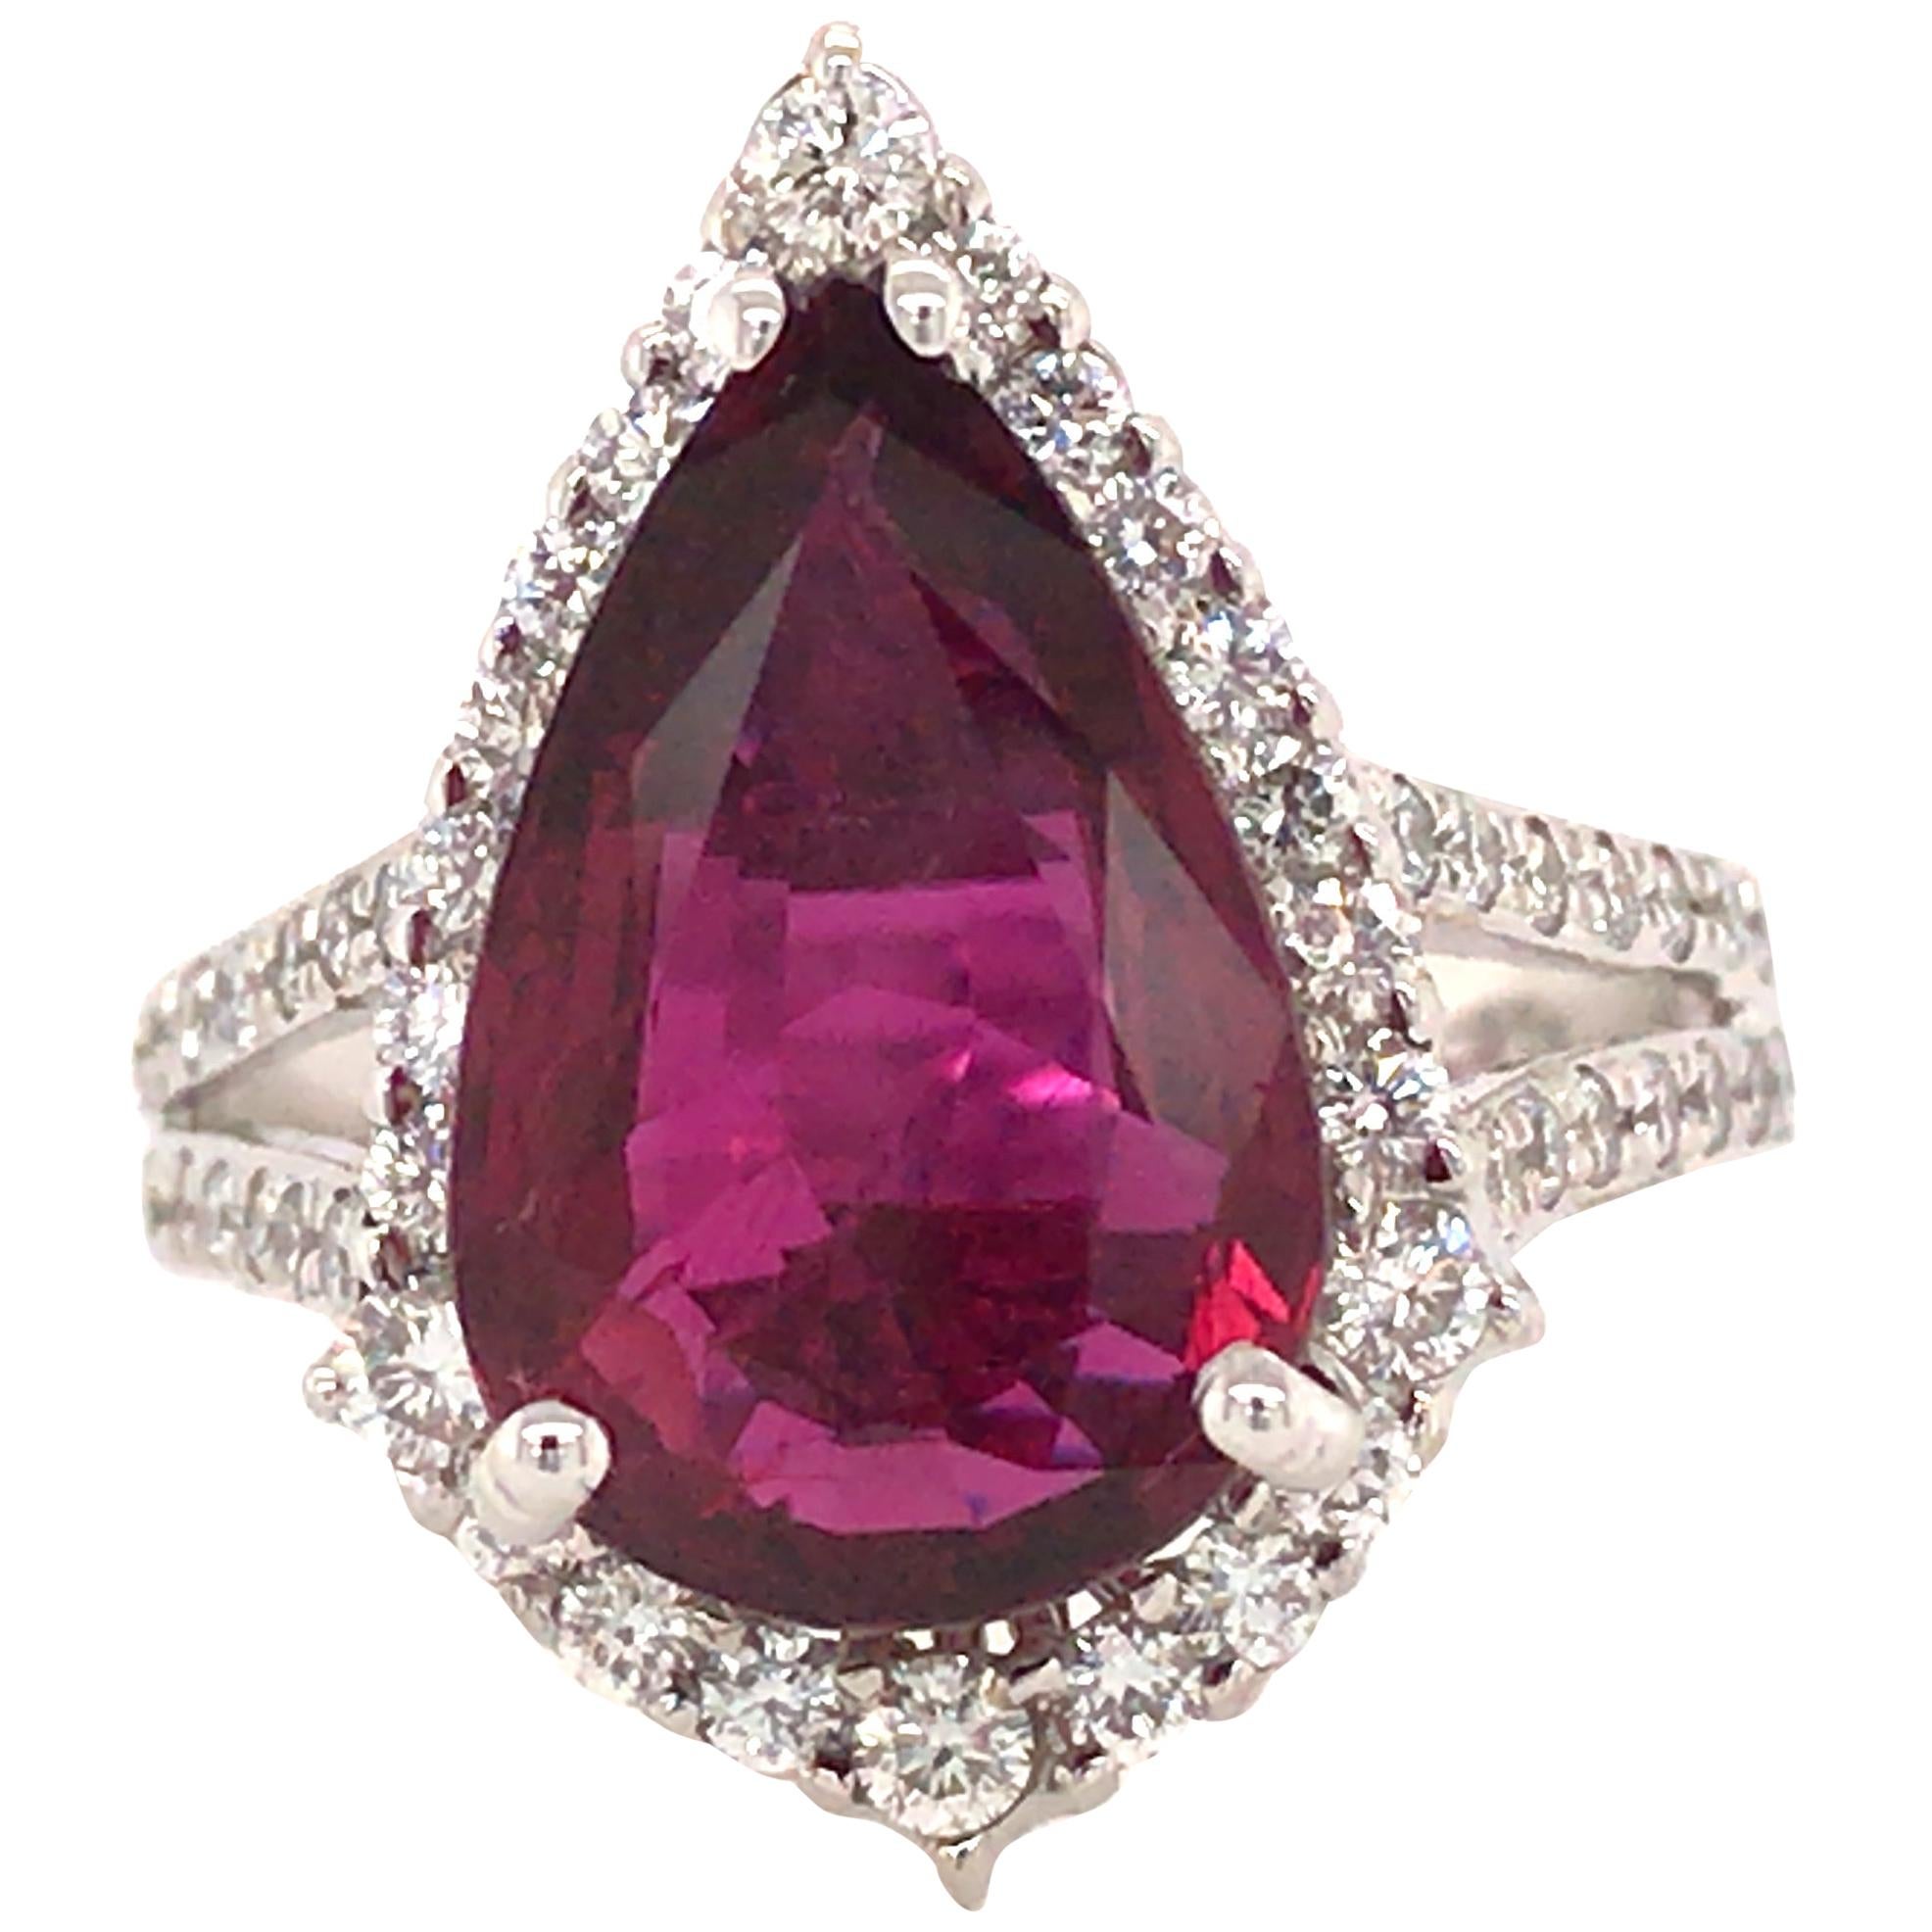 4.71 Carat Pear Shape Ruby and Diamond Halo Ring in 14 Karat White Gold For Sale